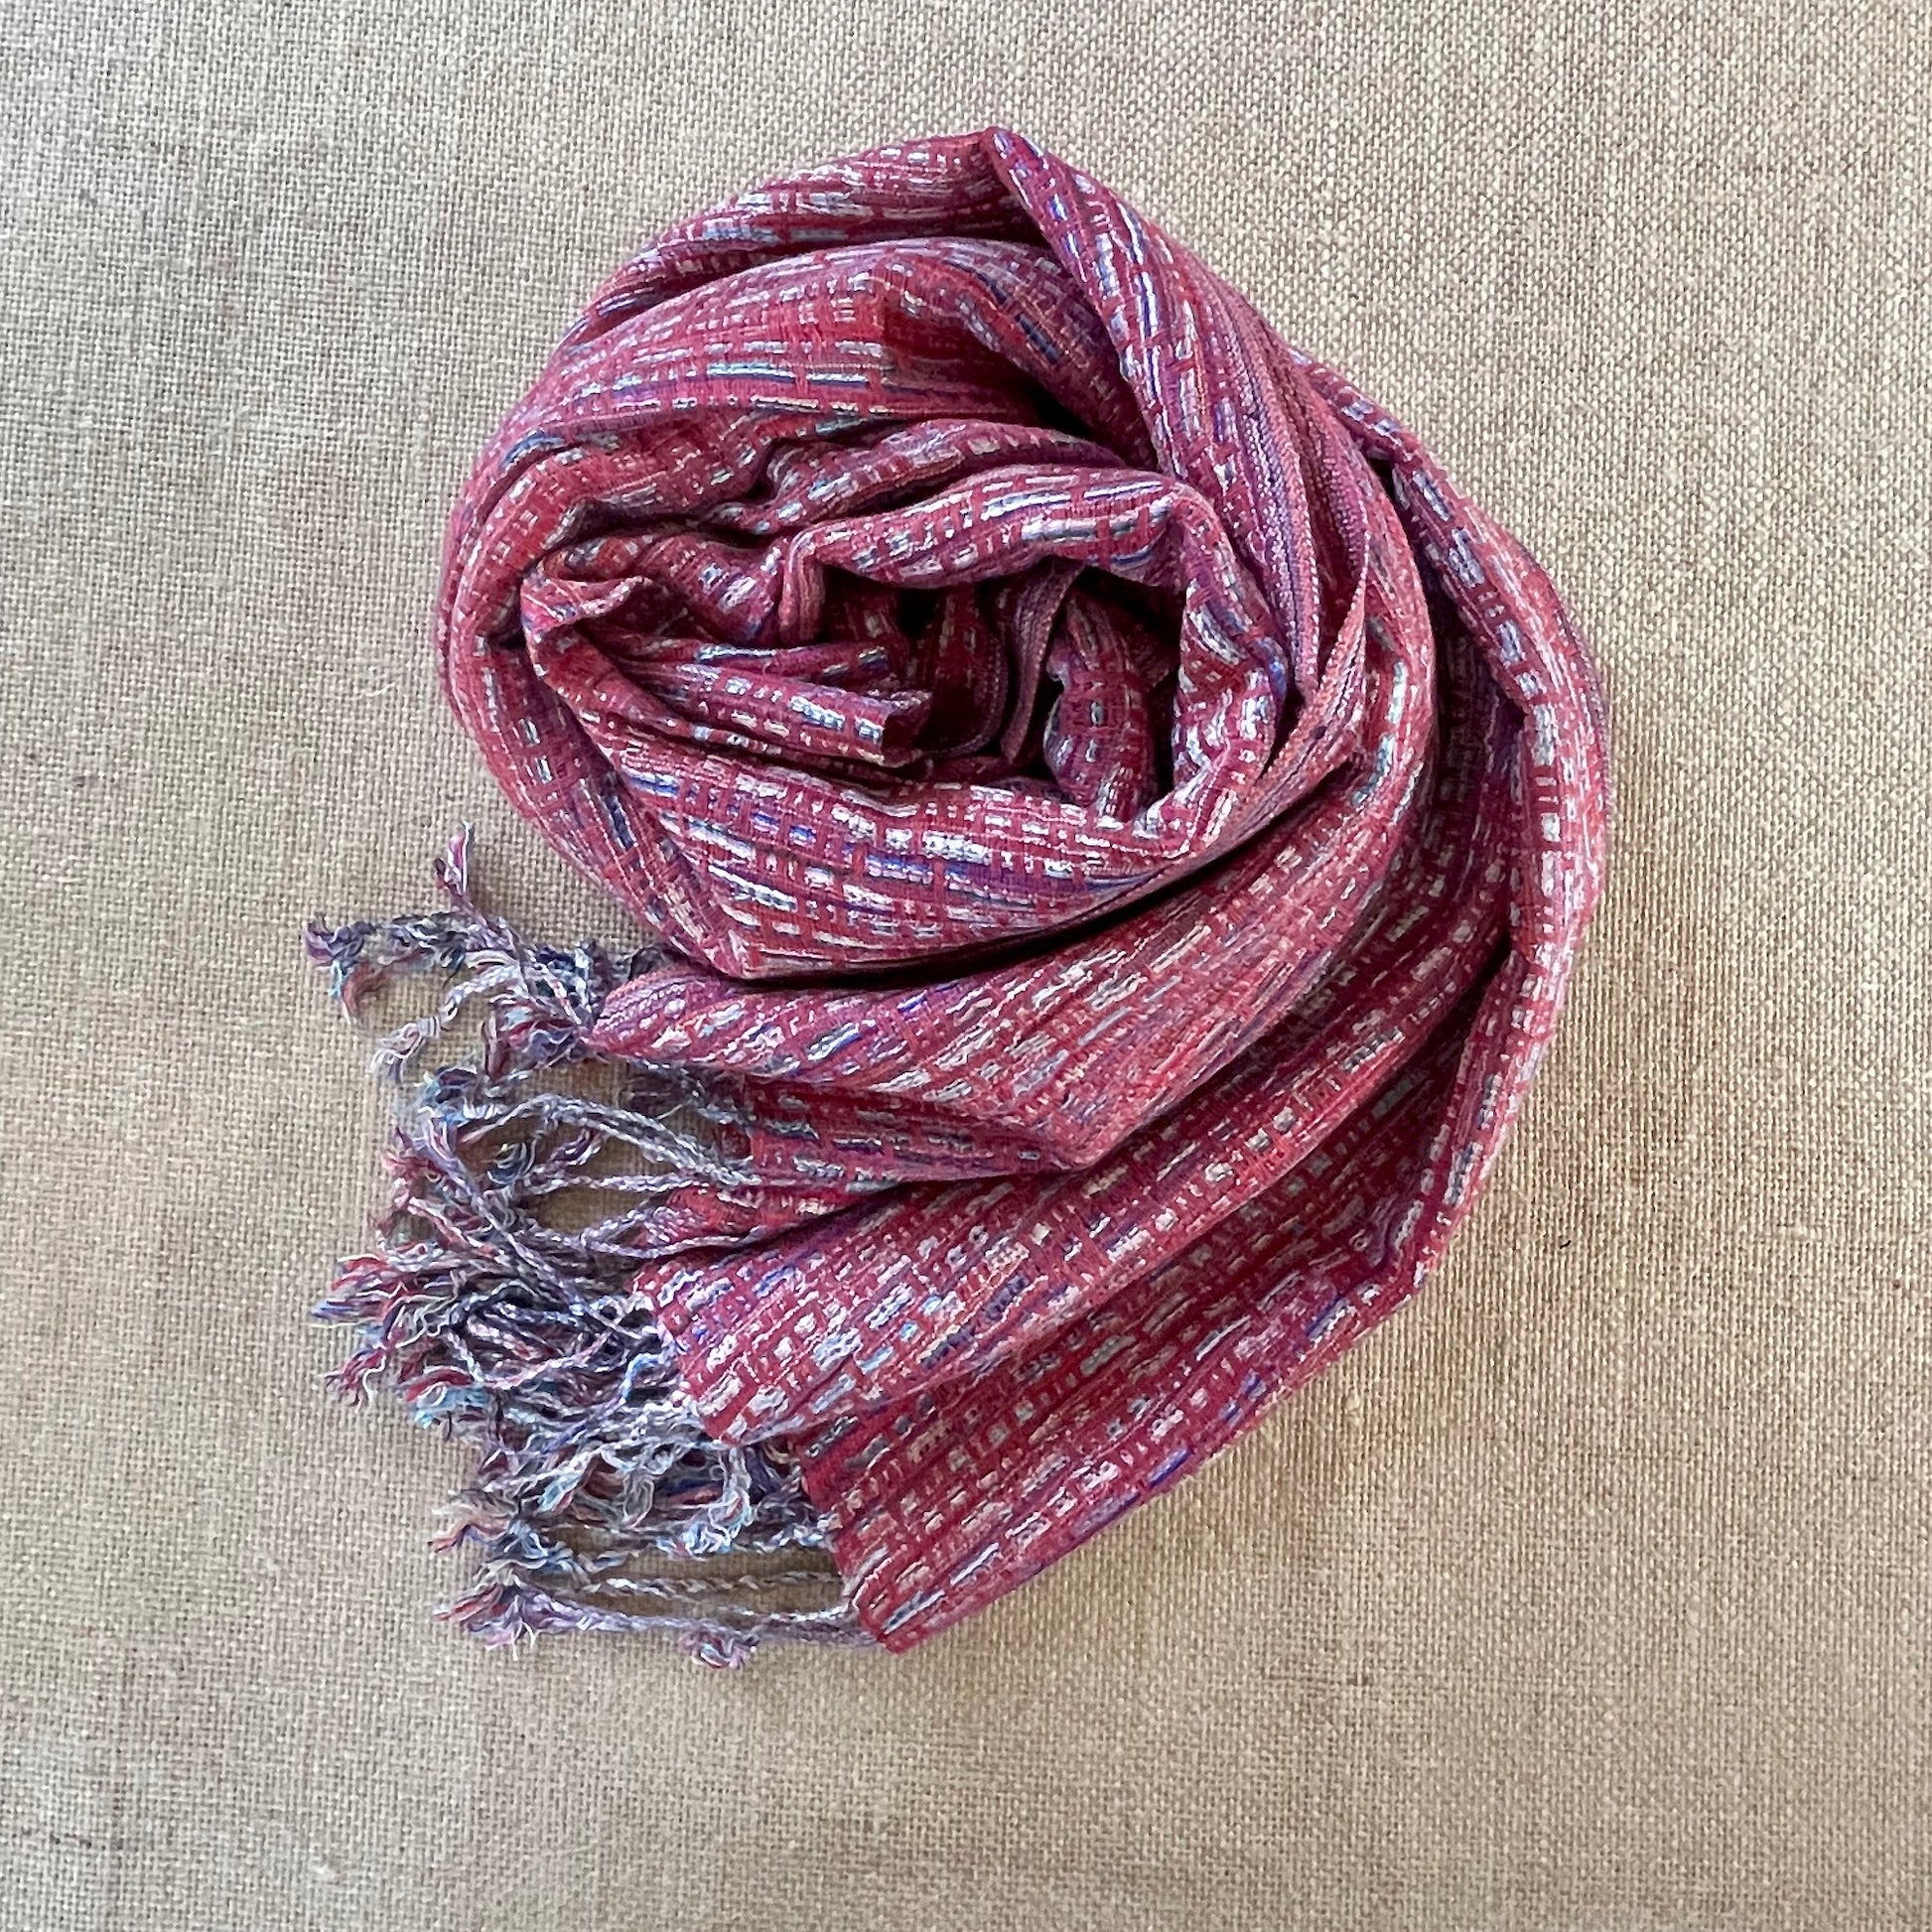 Woven Moroccan Pashmina Scarf in Red